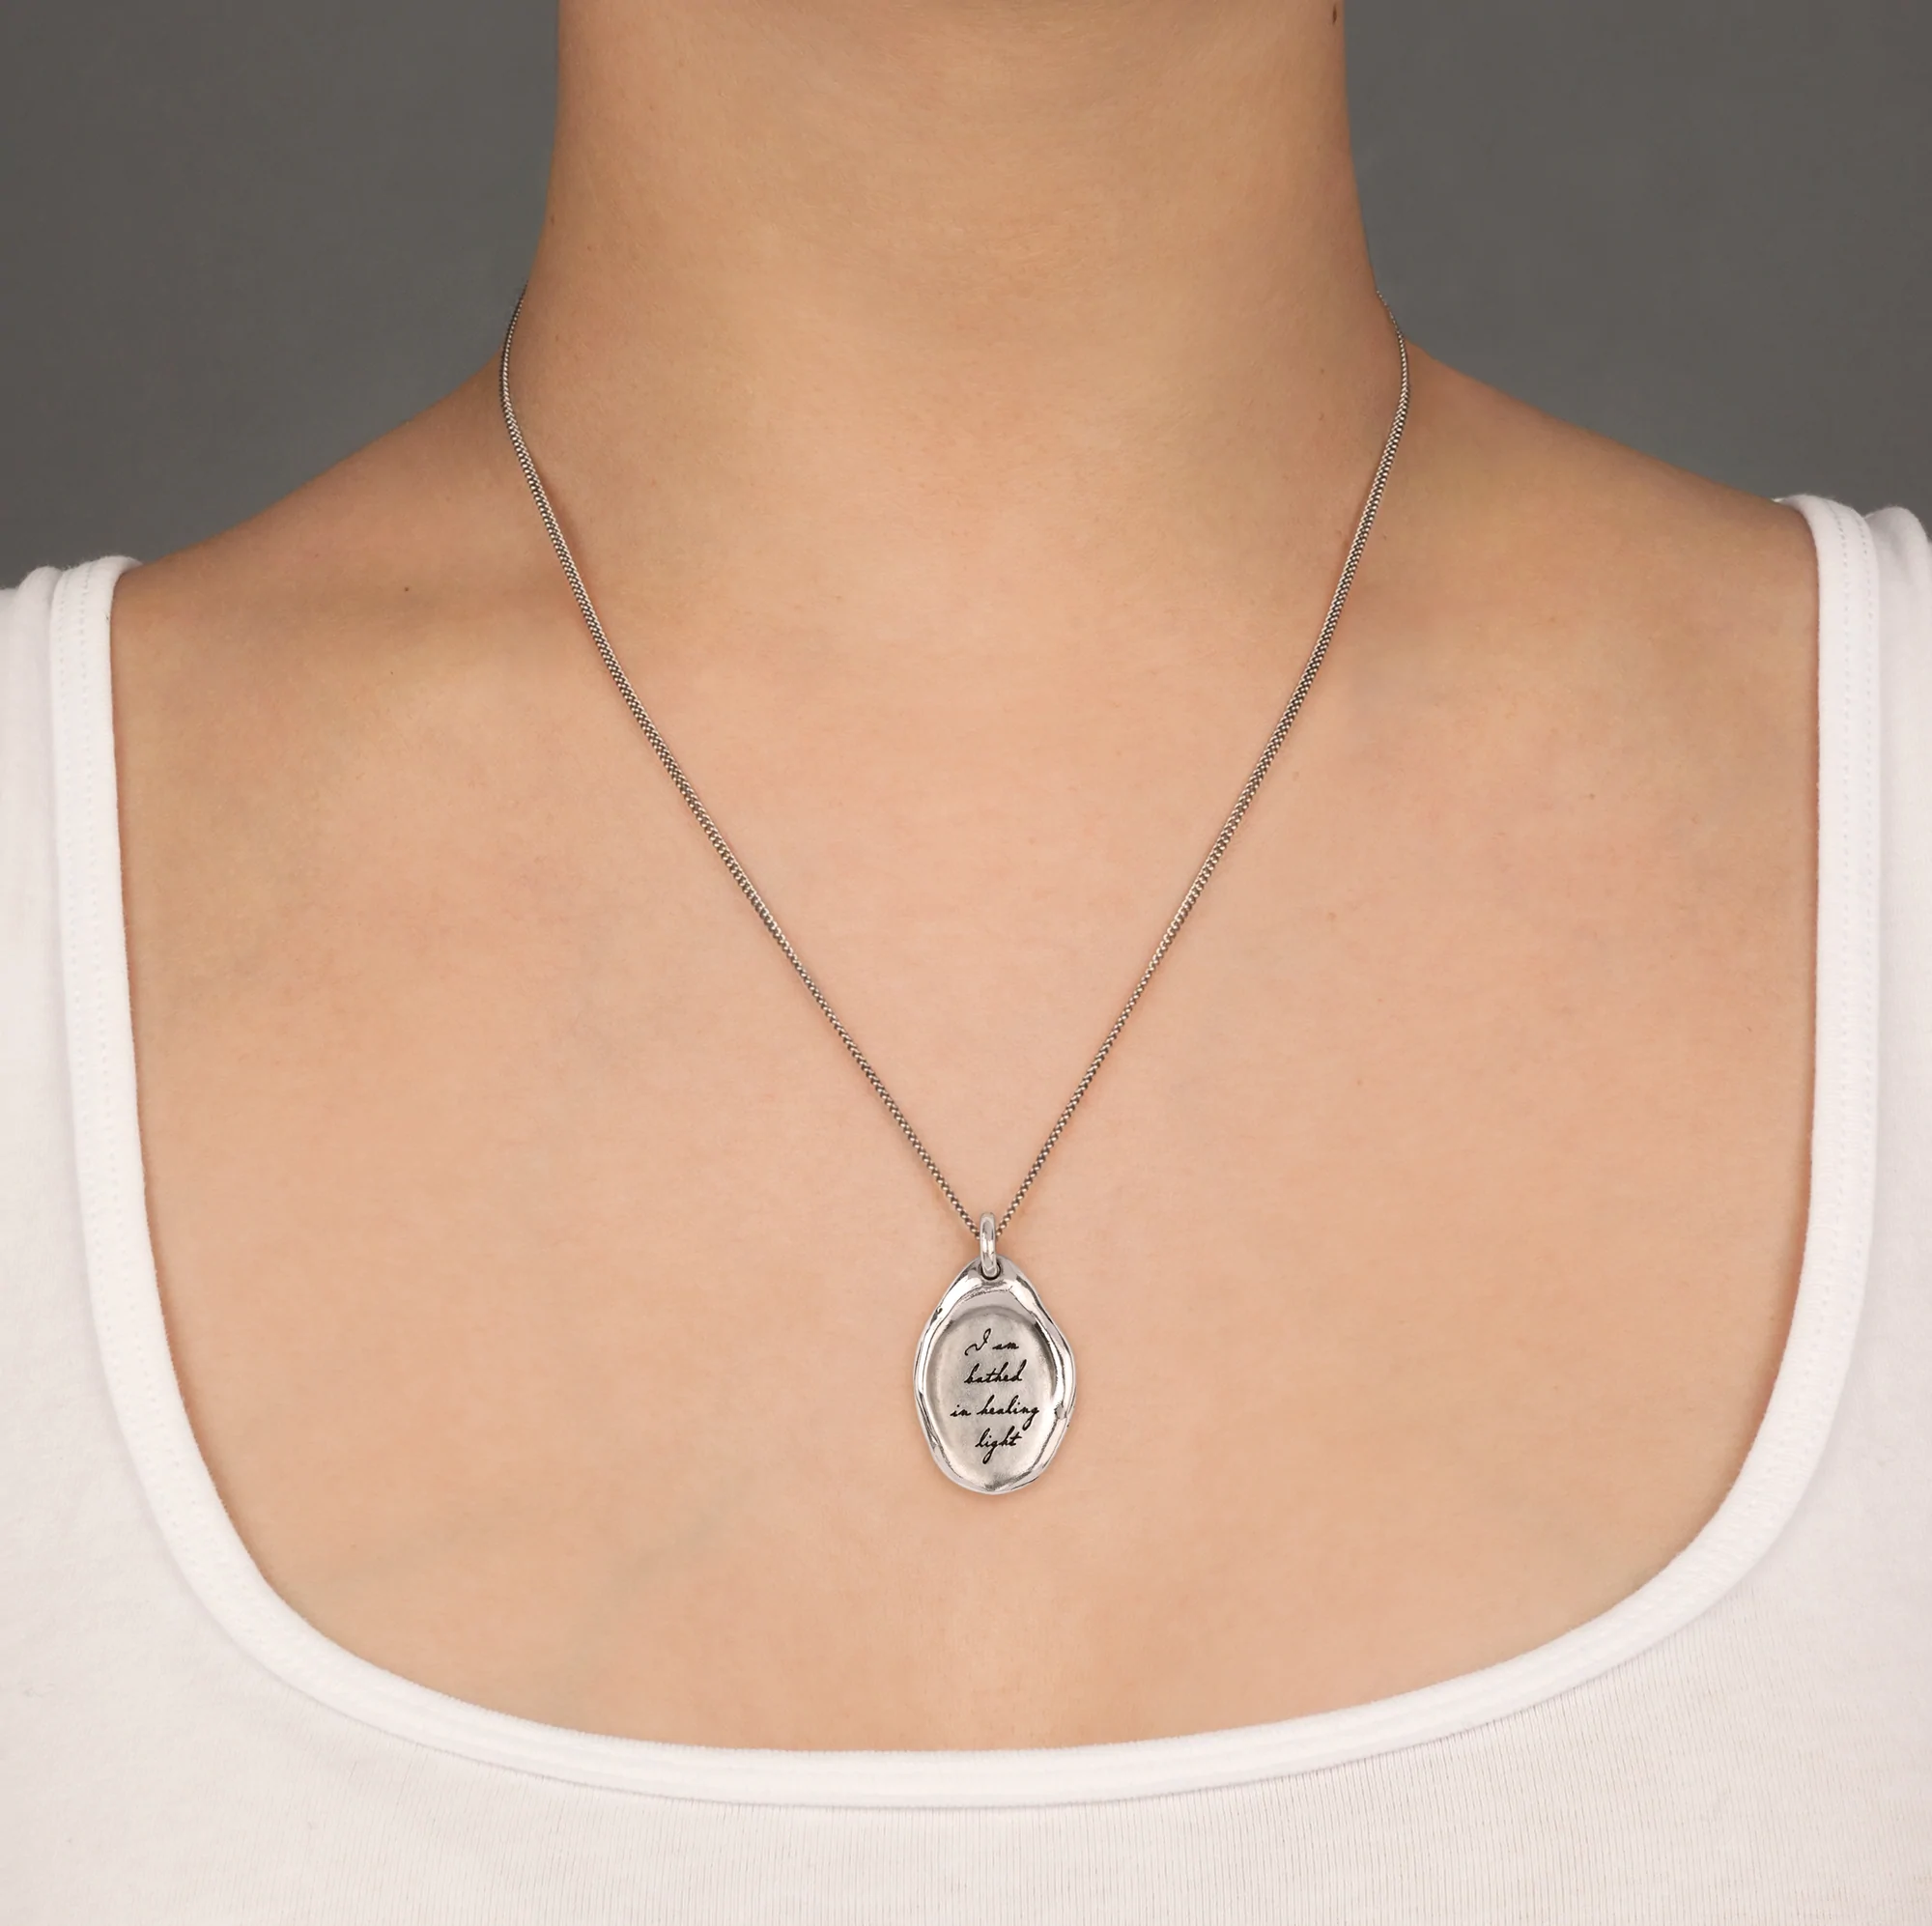 My Body Is Beautiful As It Is Affirmation Talisman | Magpie Jewellery